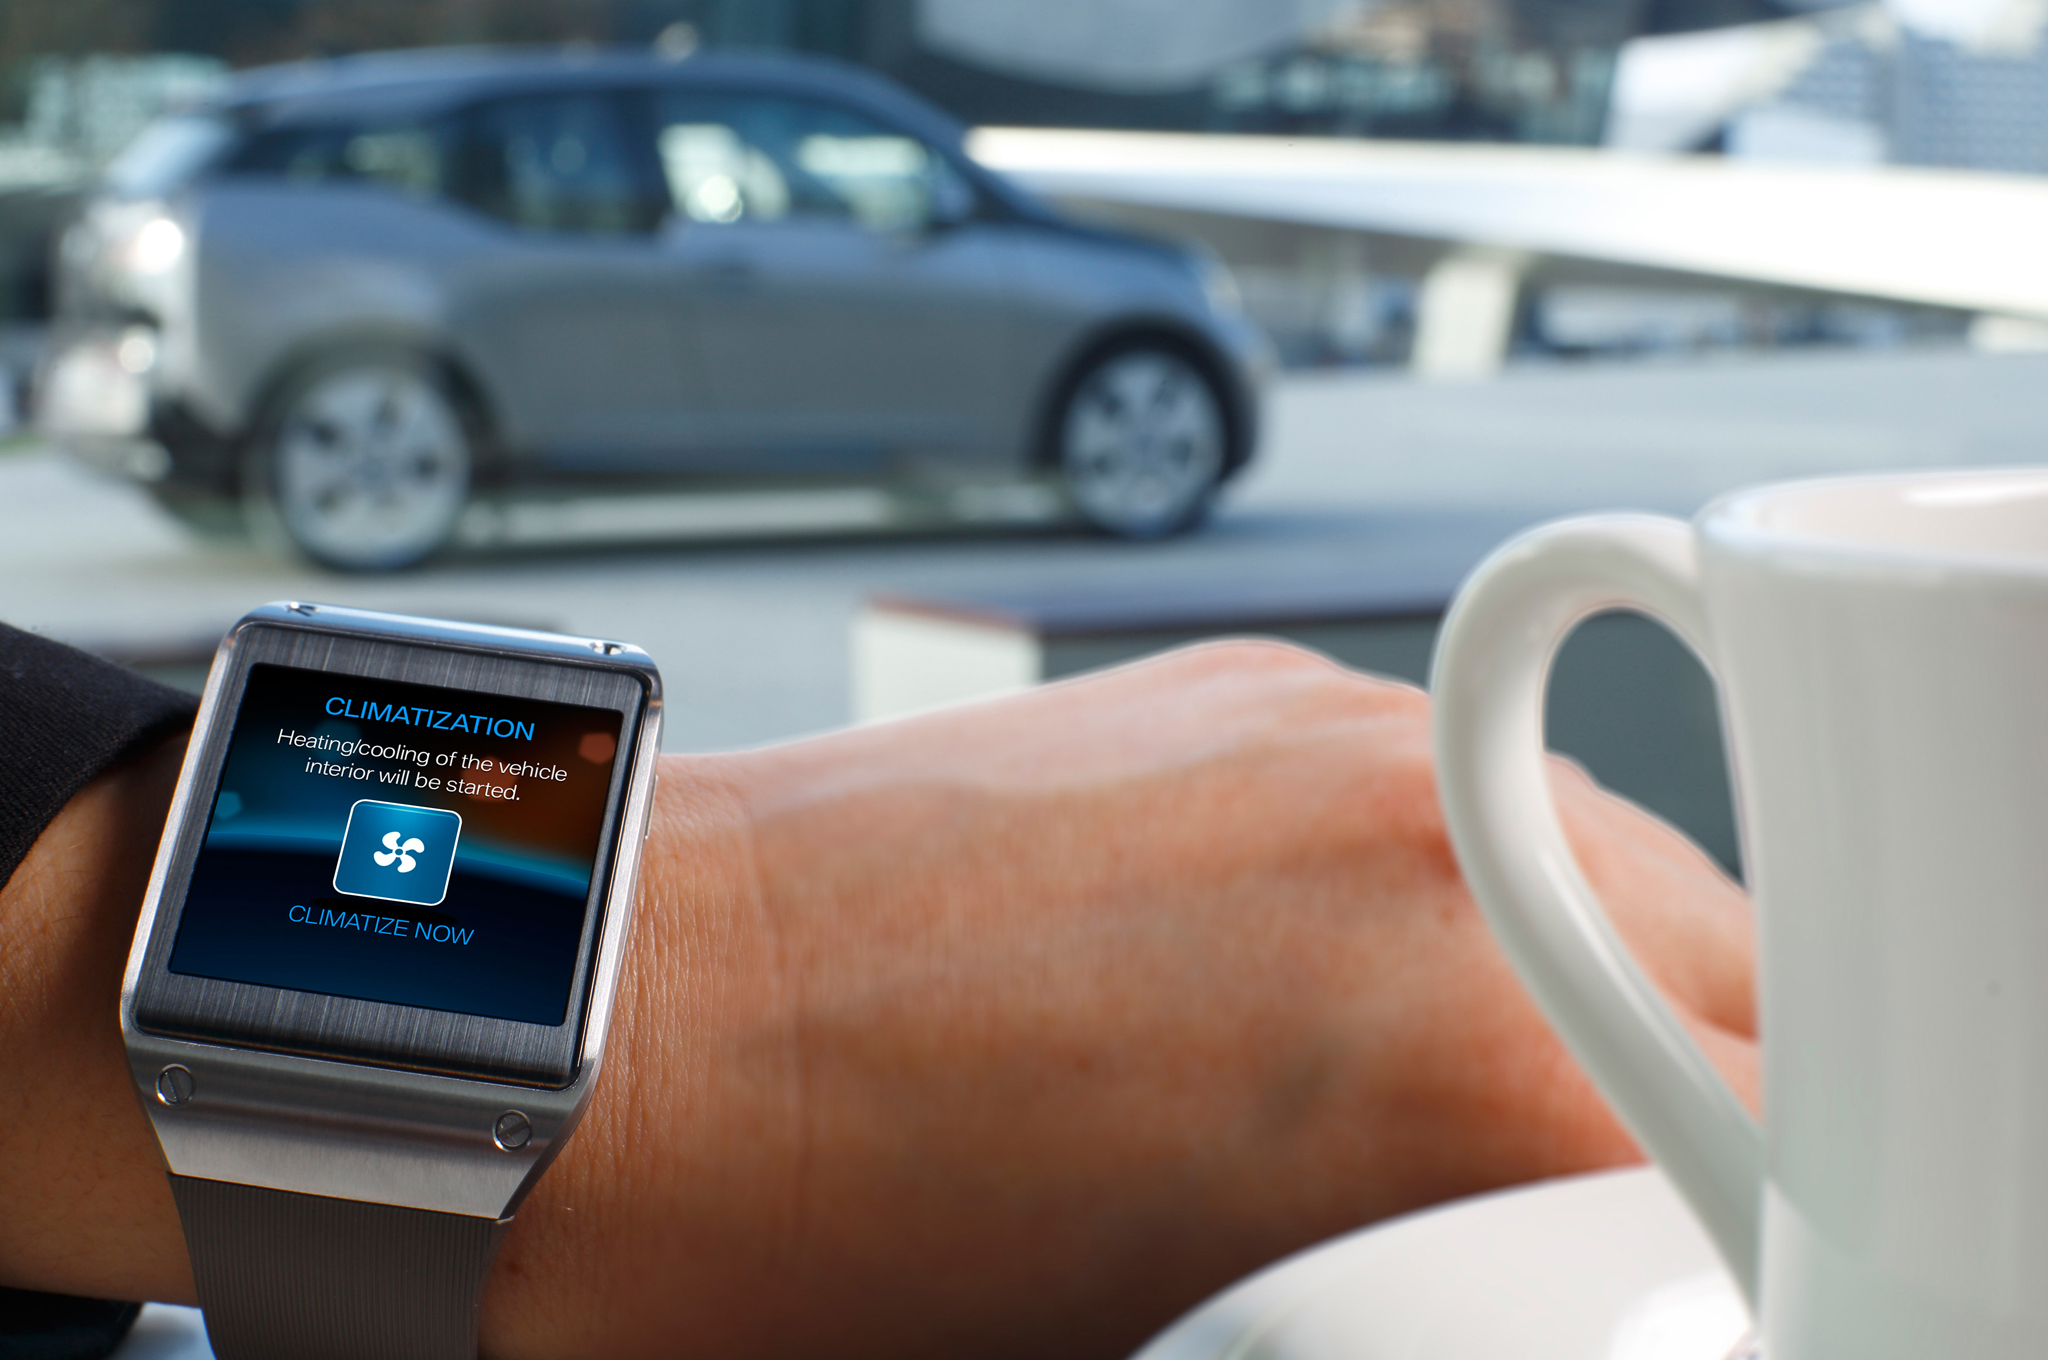 Samsung Gear S Smartwatch Now Supports Remote Control By BMW i Remote App